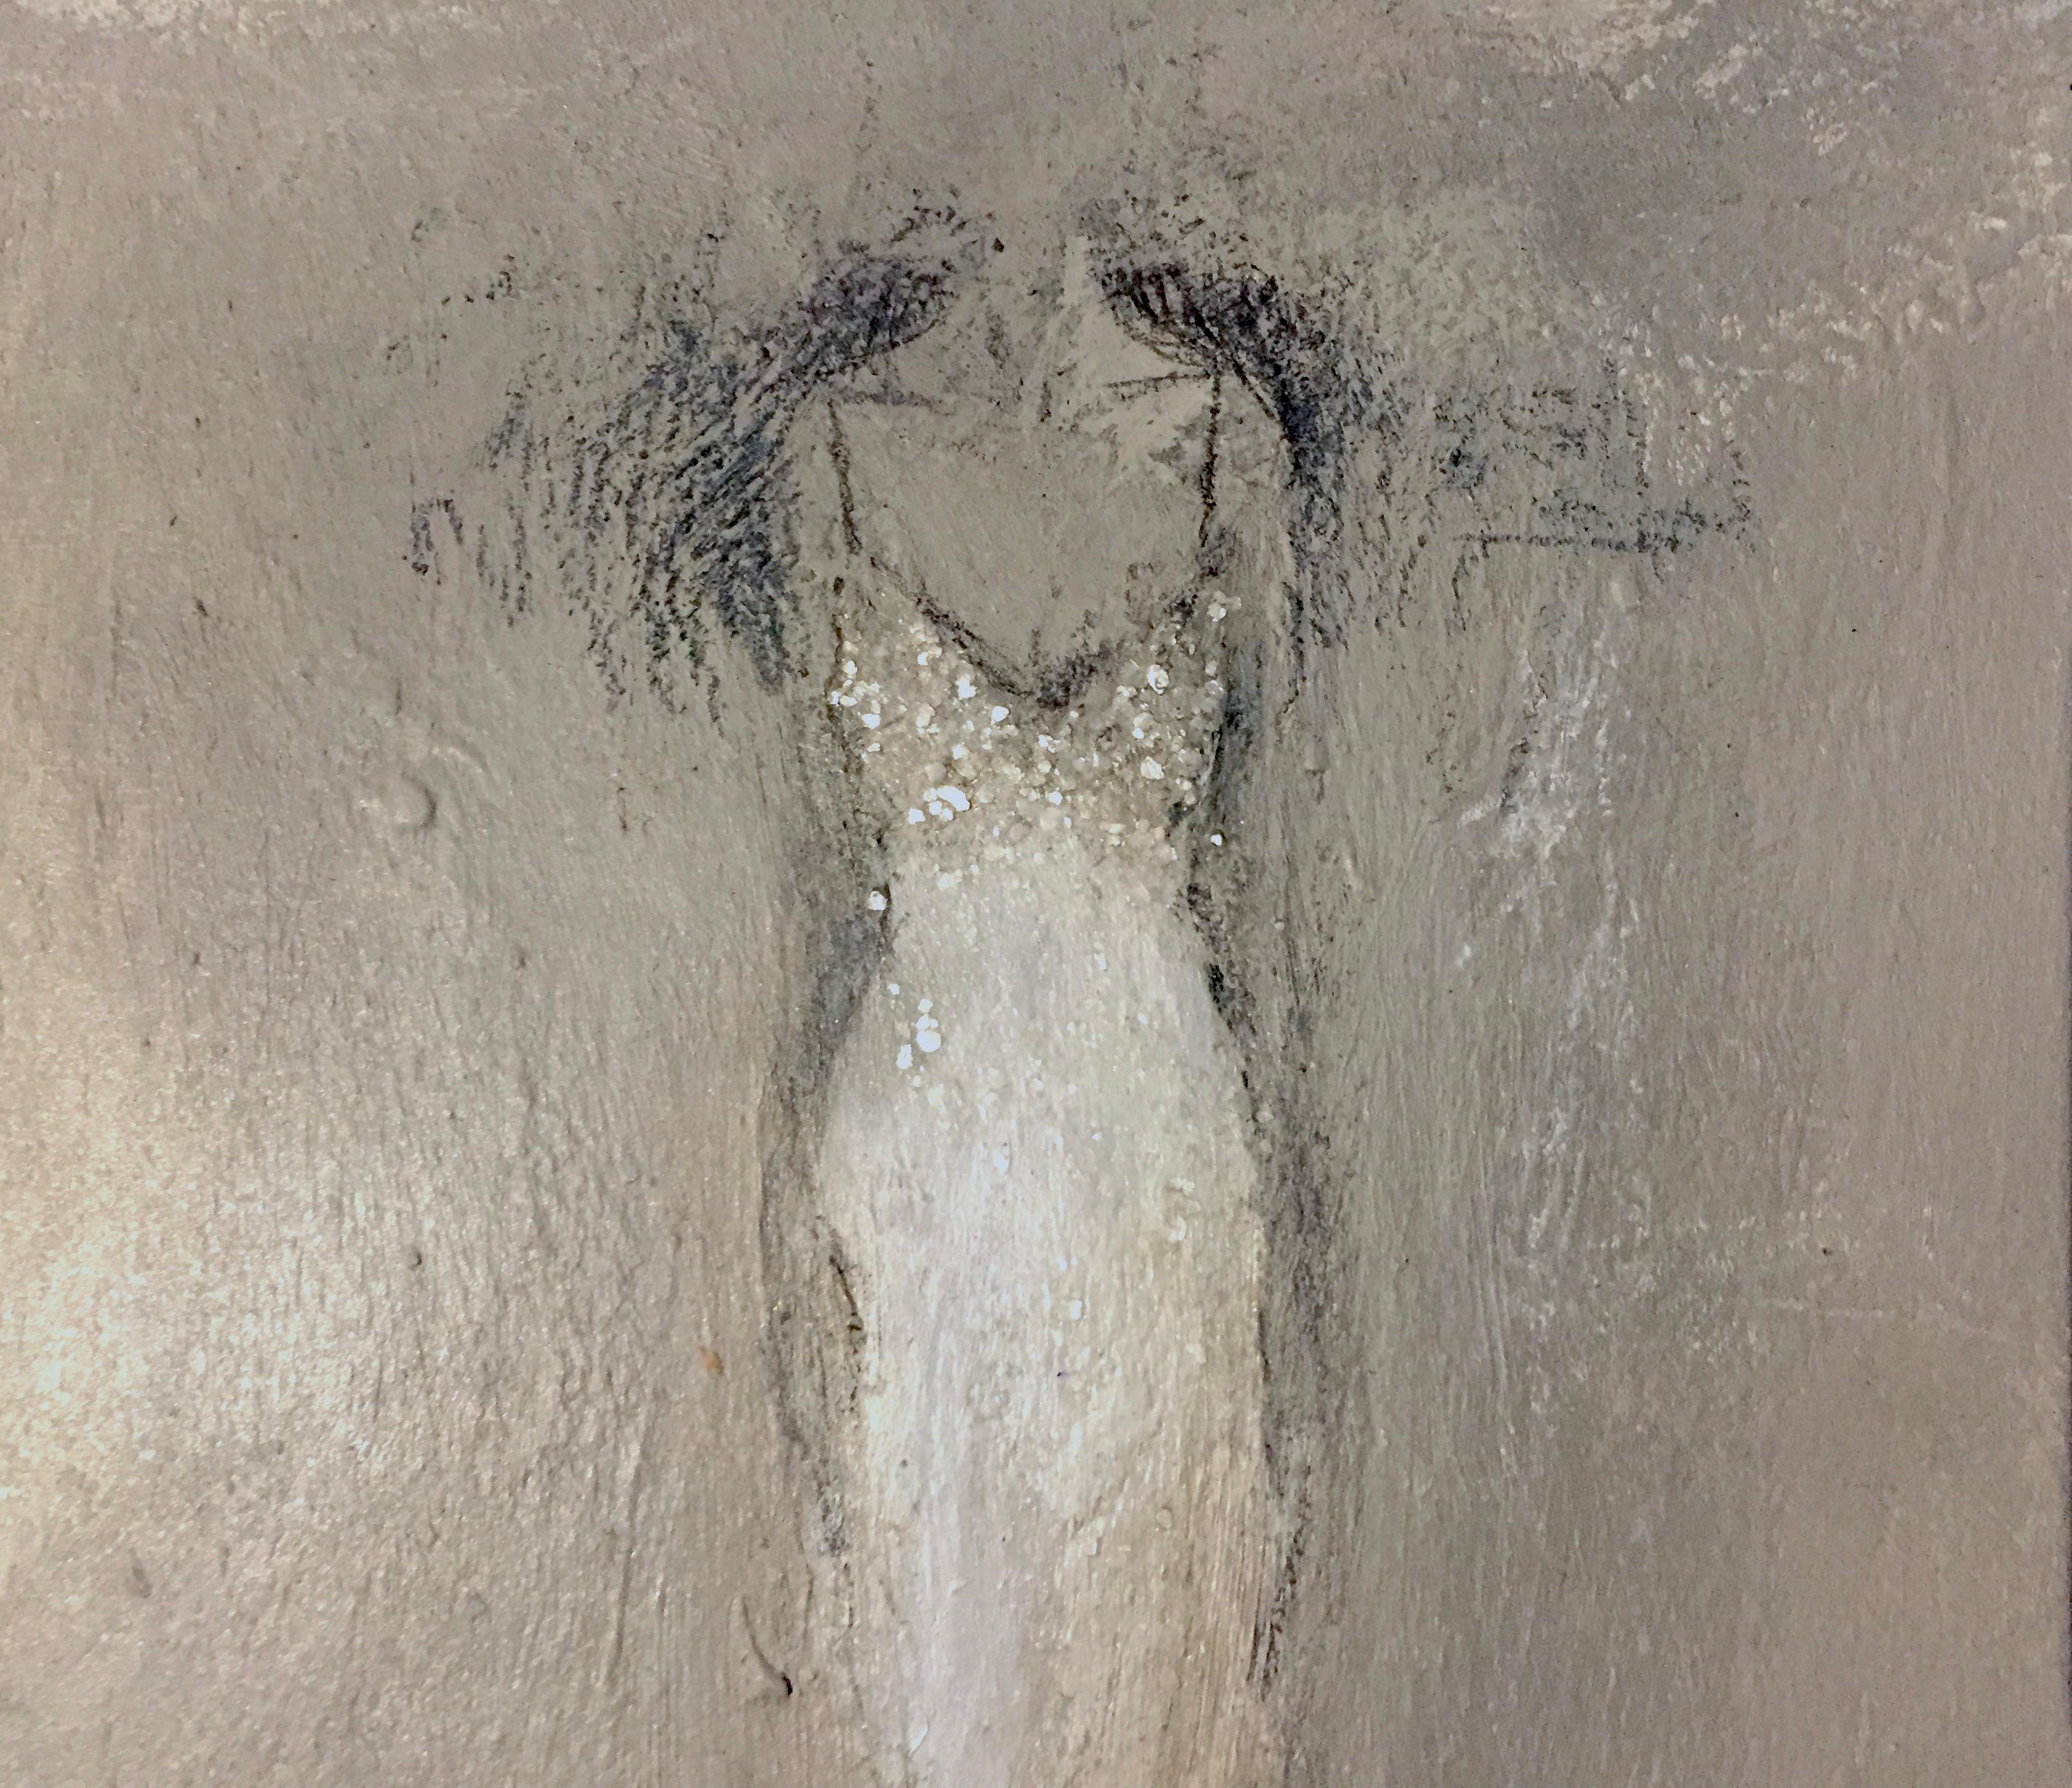 In this delicate dress painting on masonite, the combination of paint, pencil and mixed media build up a textured, figurative composition. A blend of detail and loose brush work communicates a feminine, ethereal impression with an outcome both